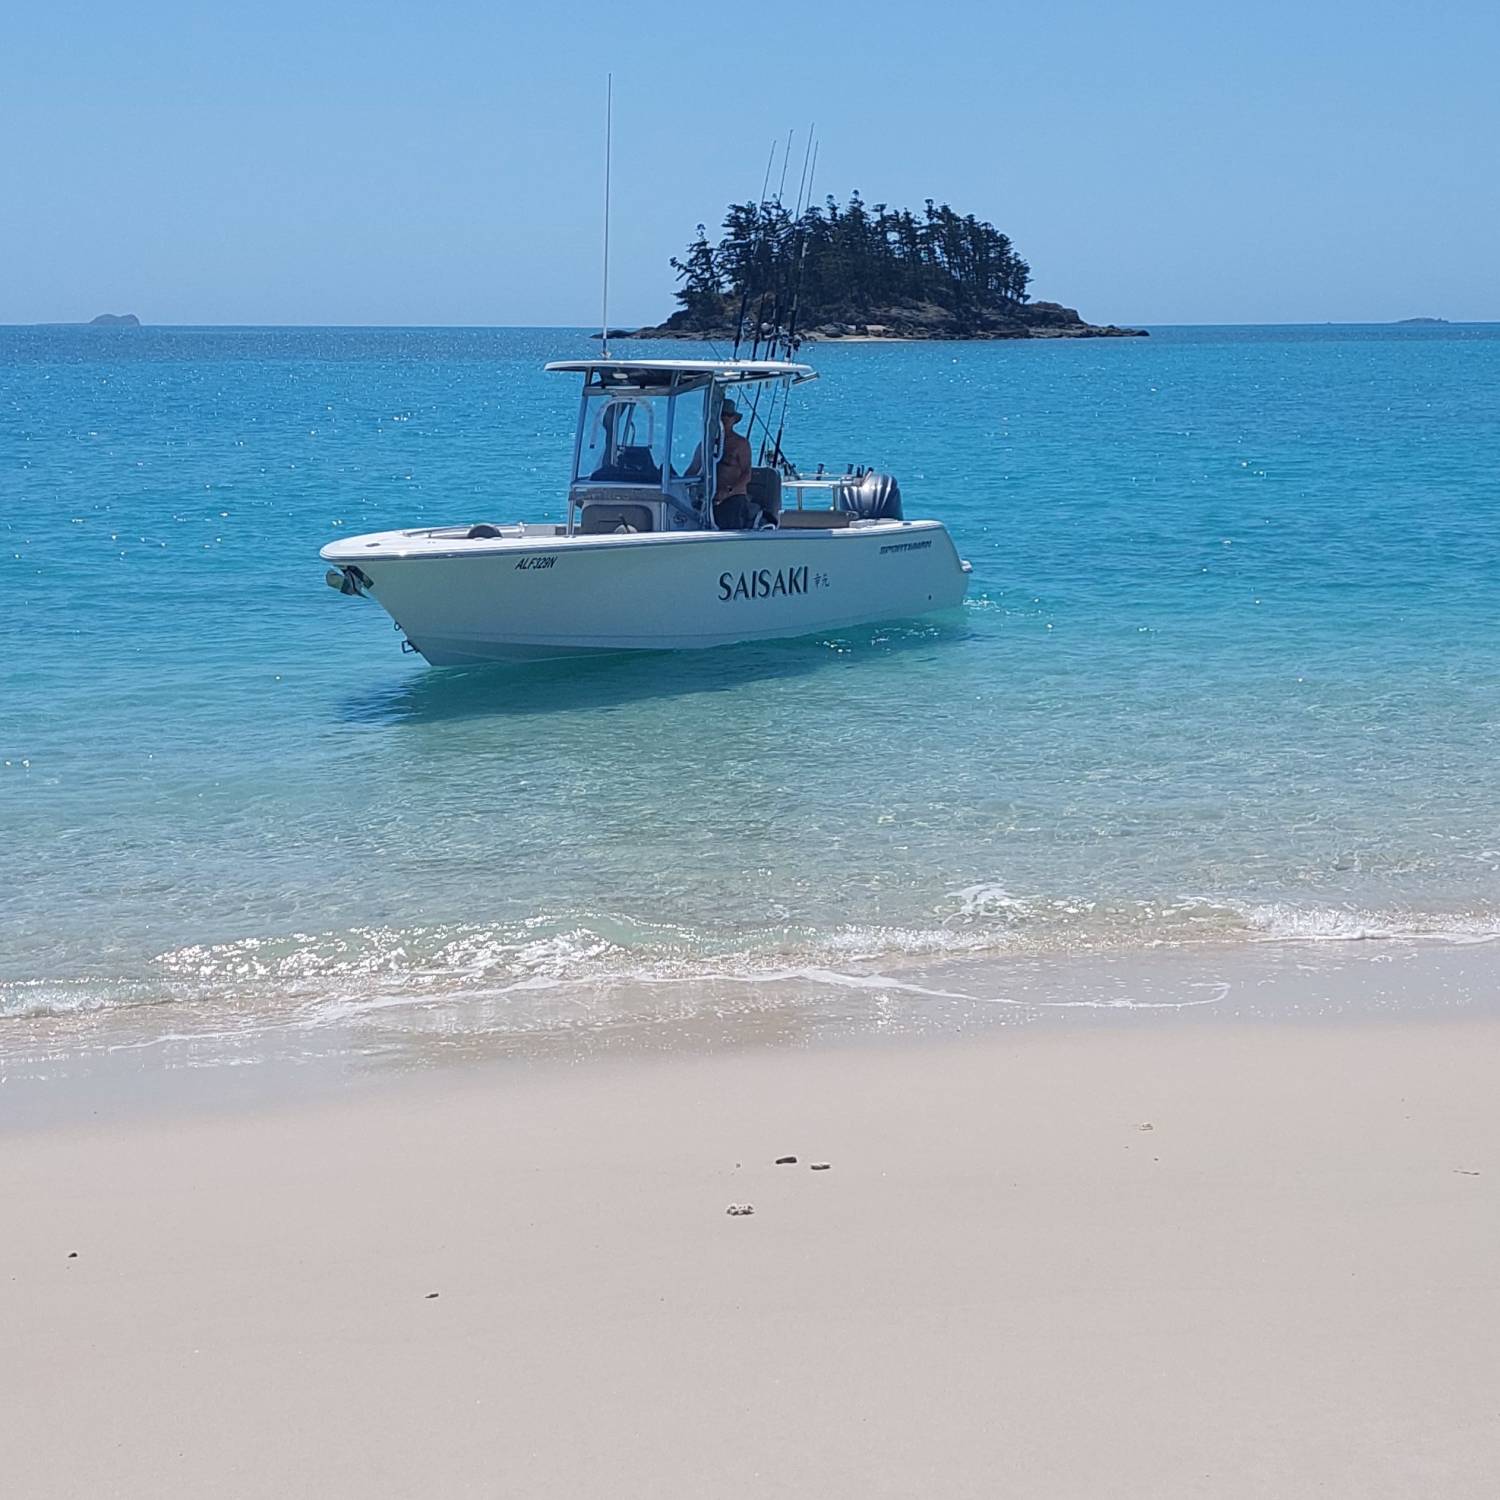 Title: Tropical bliss - On board their Sportsman Open 232 Center Console - Location: Whitehaven Beach Whitsundays Australia. Participating in the Photo Contest #SportsmanOctober2023